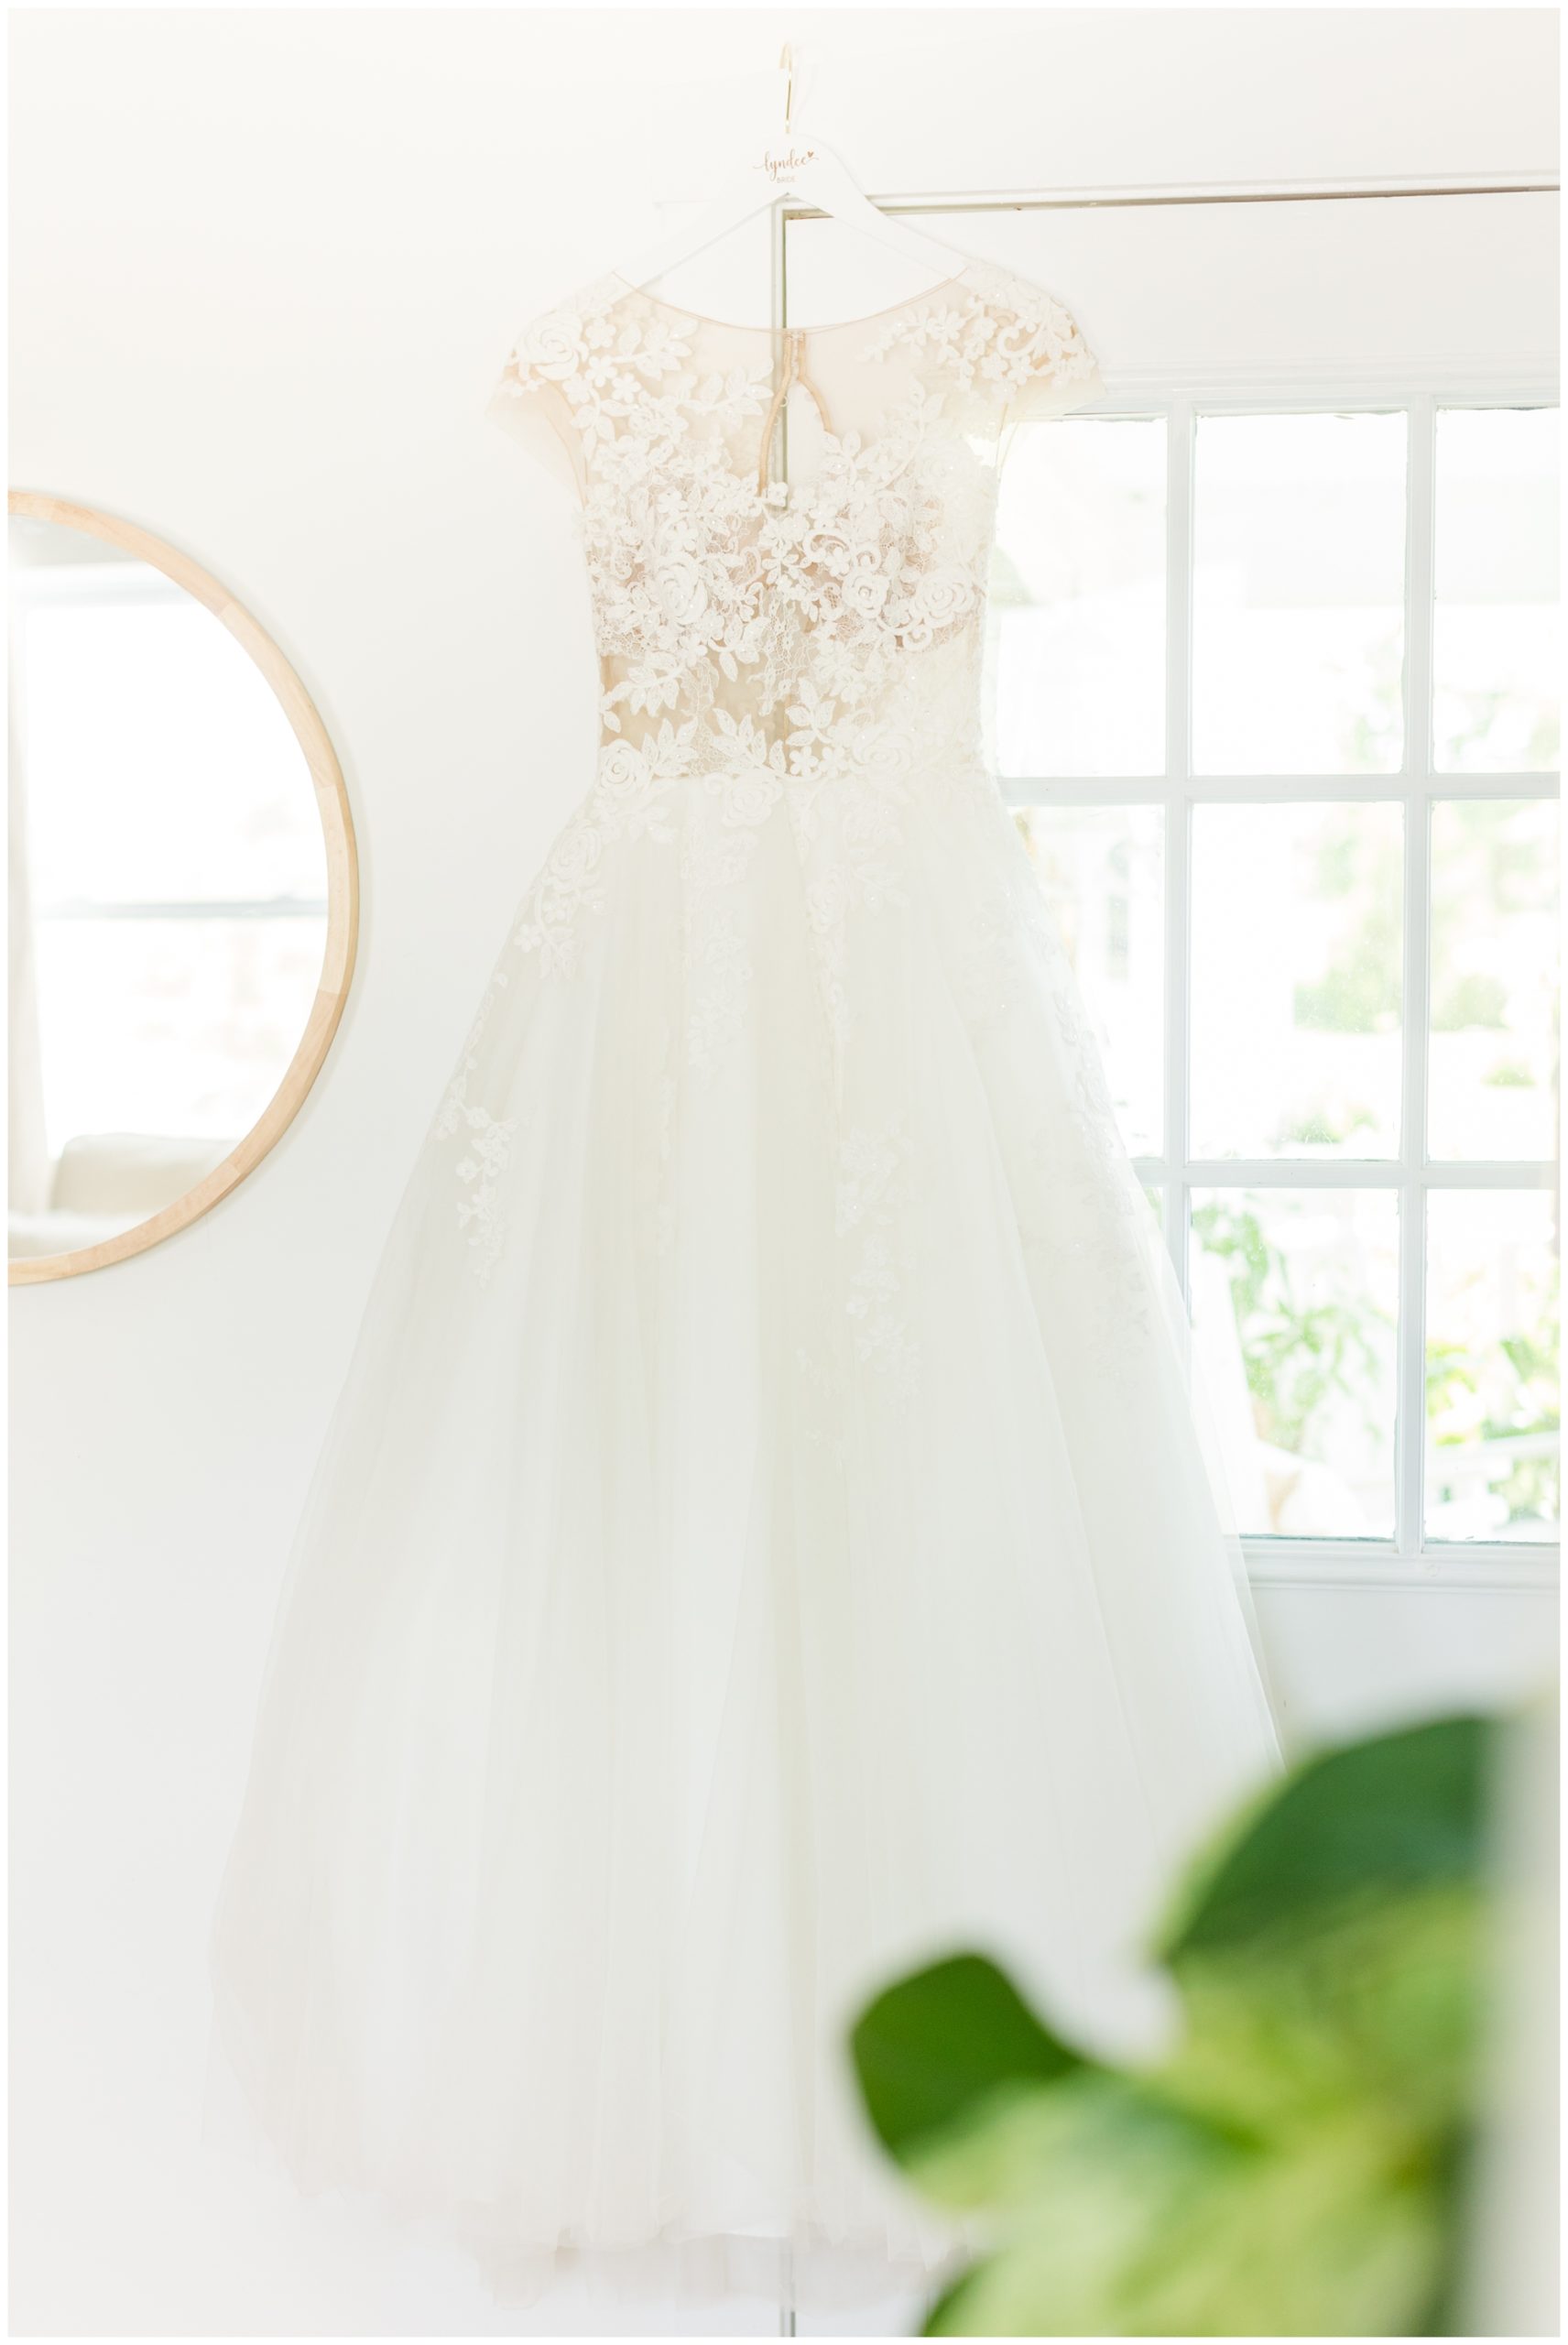 The bride's lace wedding dress is hung on a white custom hanger in front of a window.